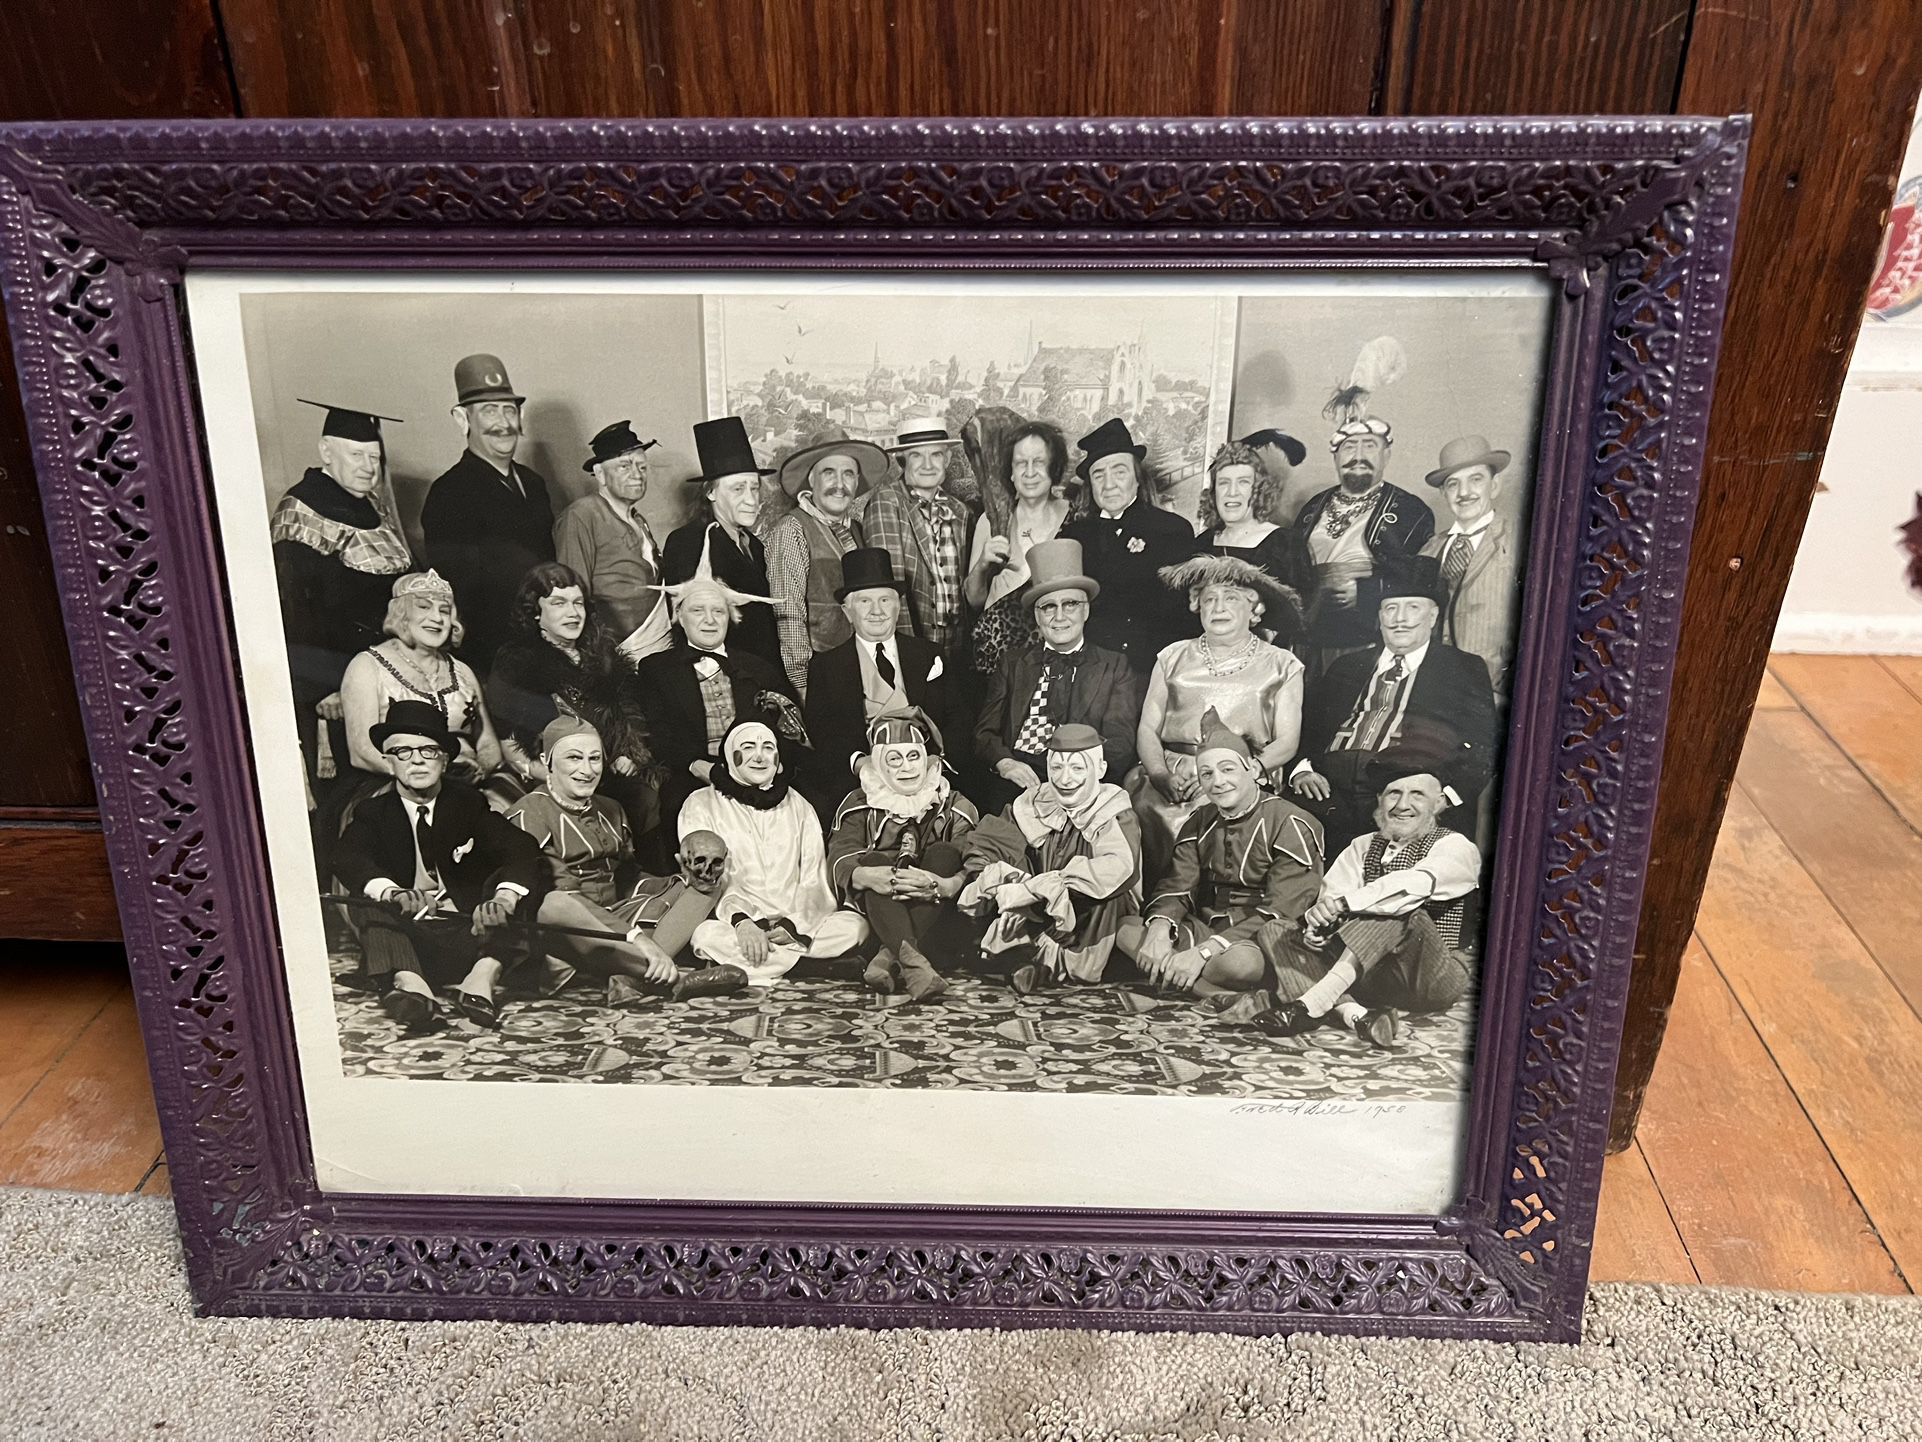 Unusual 1958 Framed Men in Costumes Photograph